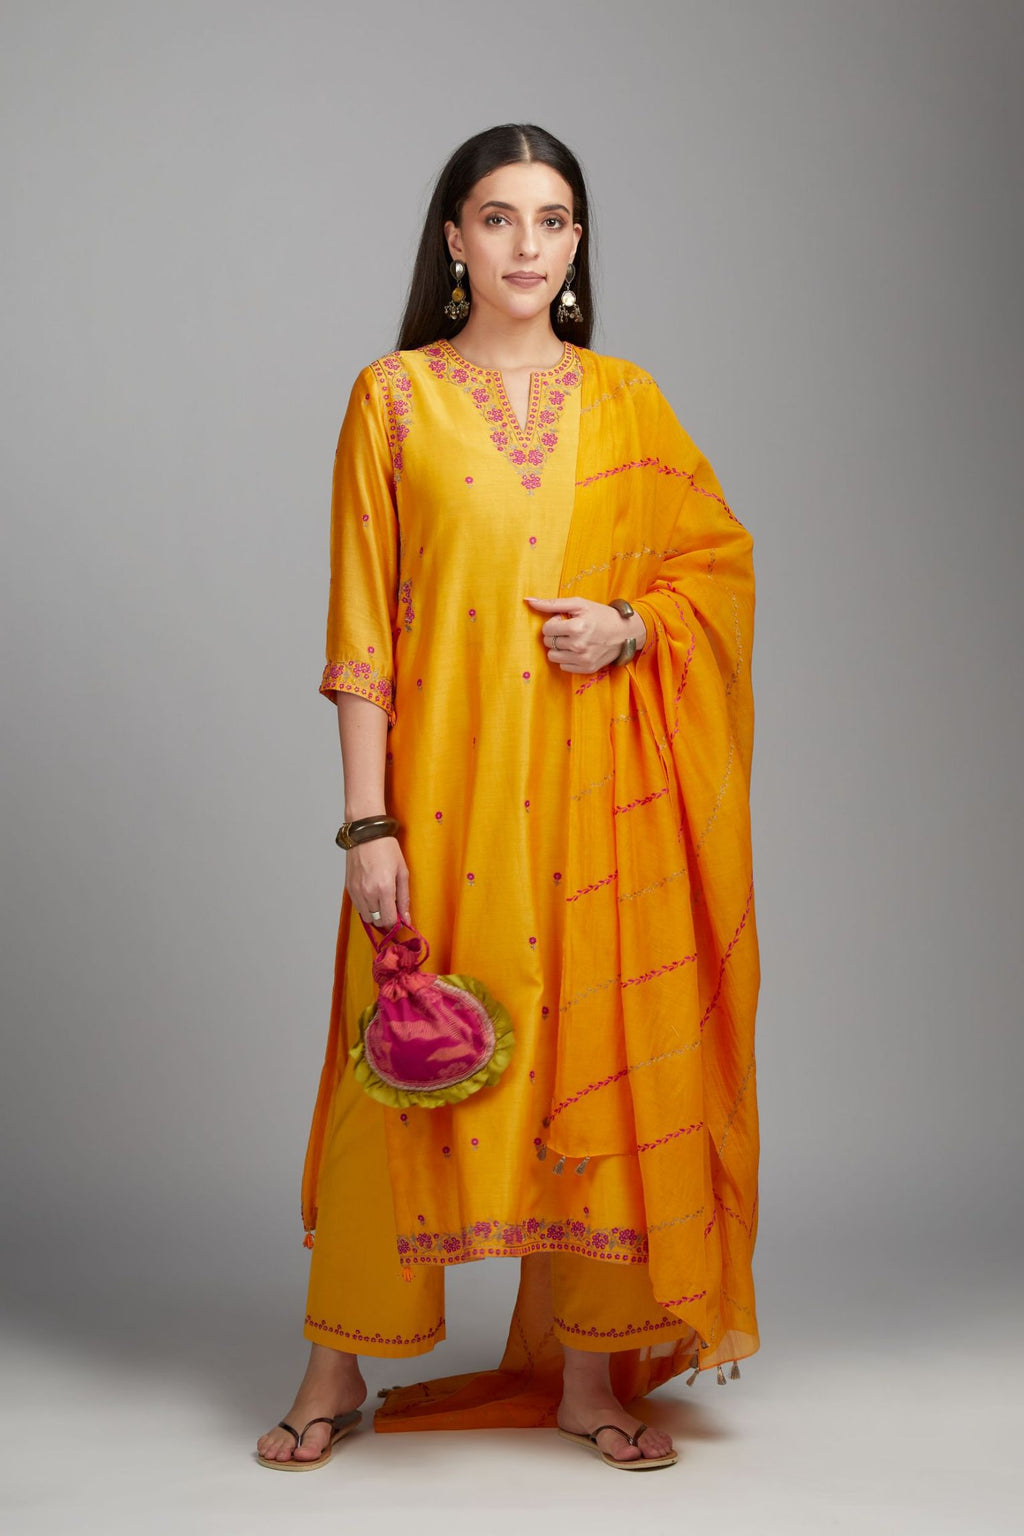 Mango yellow straight kurta set, highlighted with all-over delicate contrast coloured embroidery